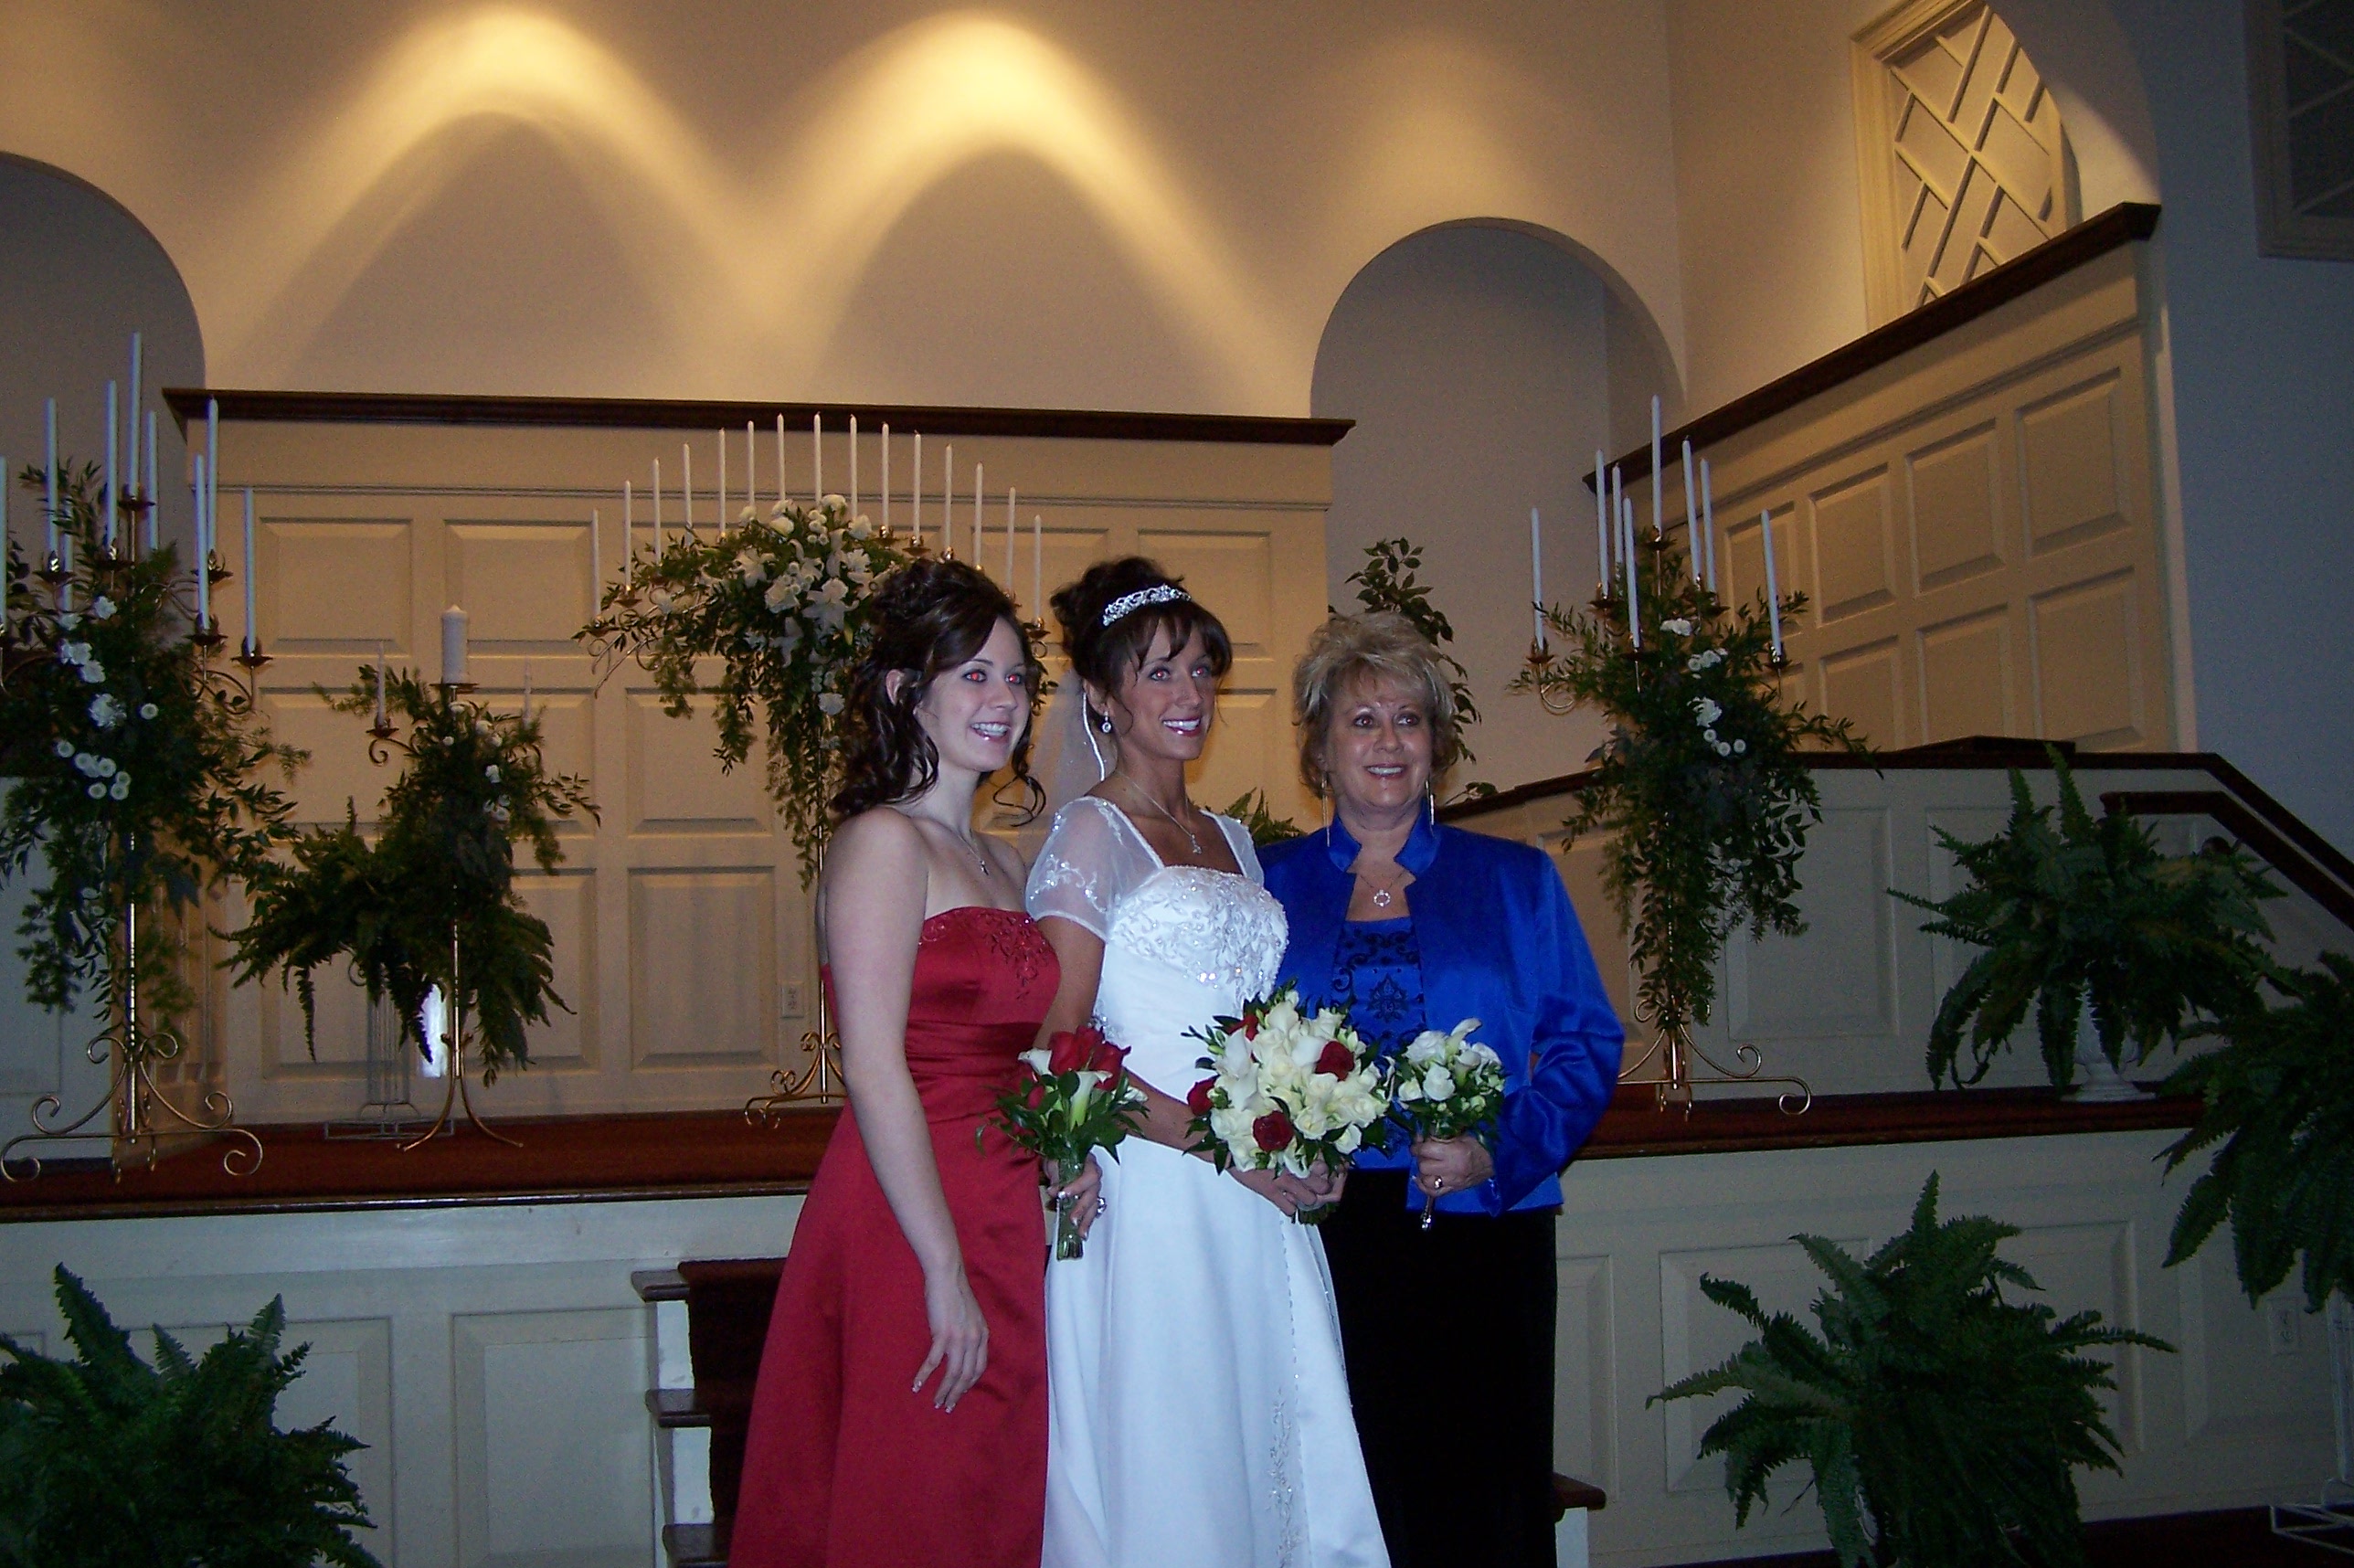 Kaitlyn, Amy and Mom (me)